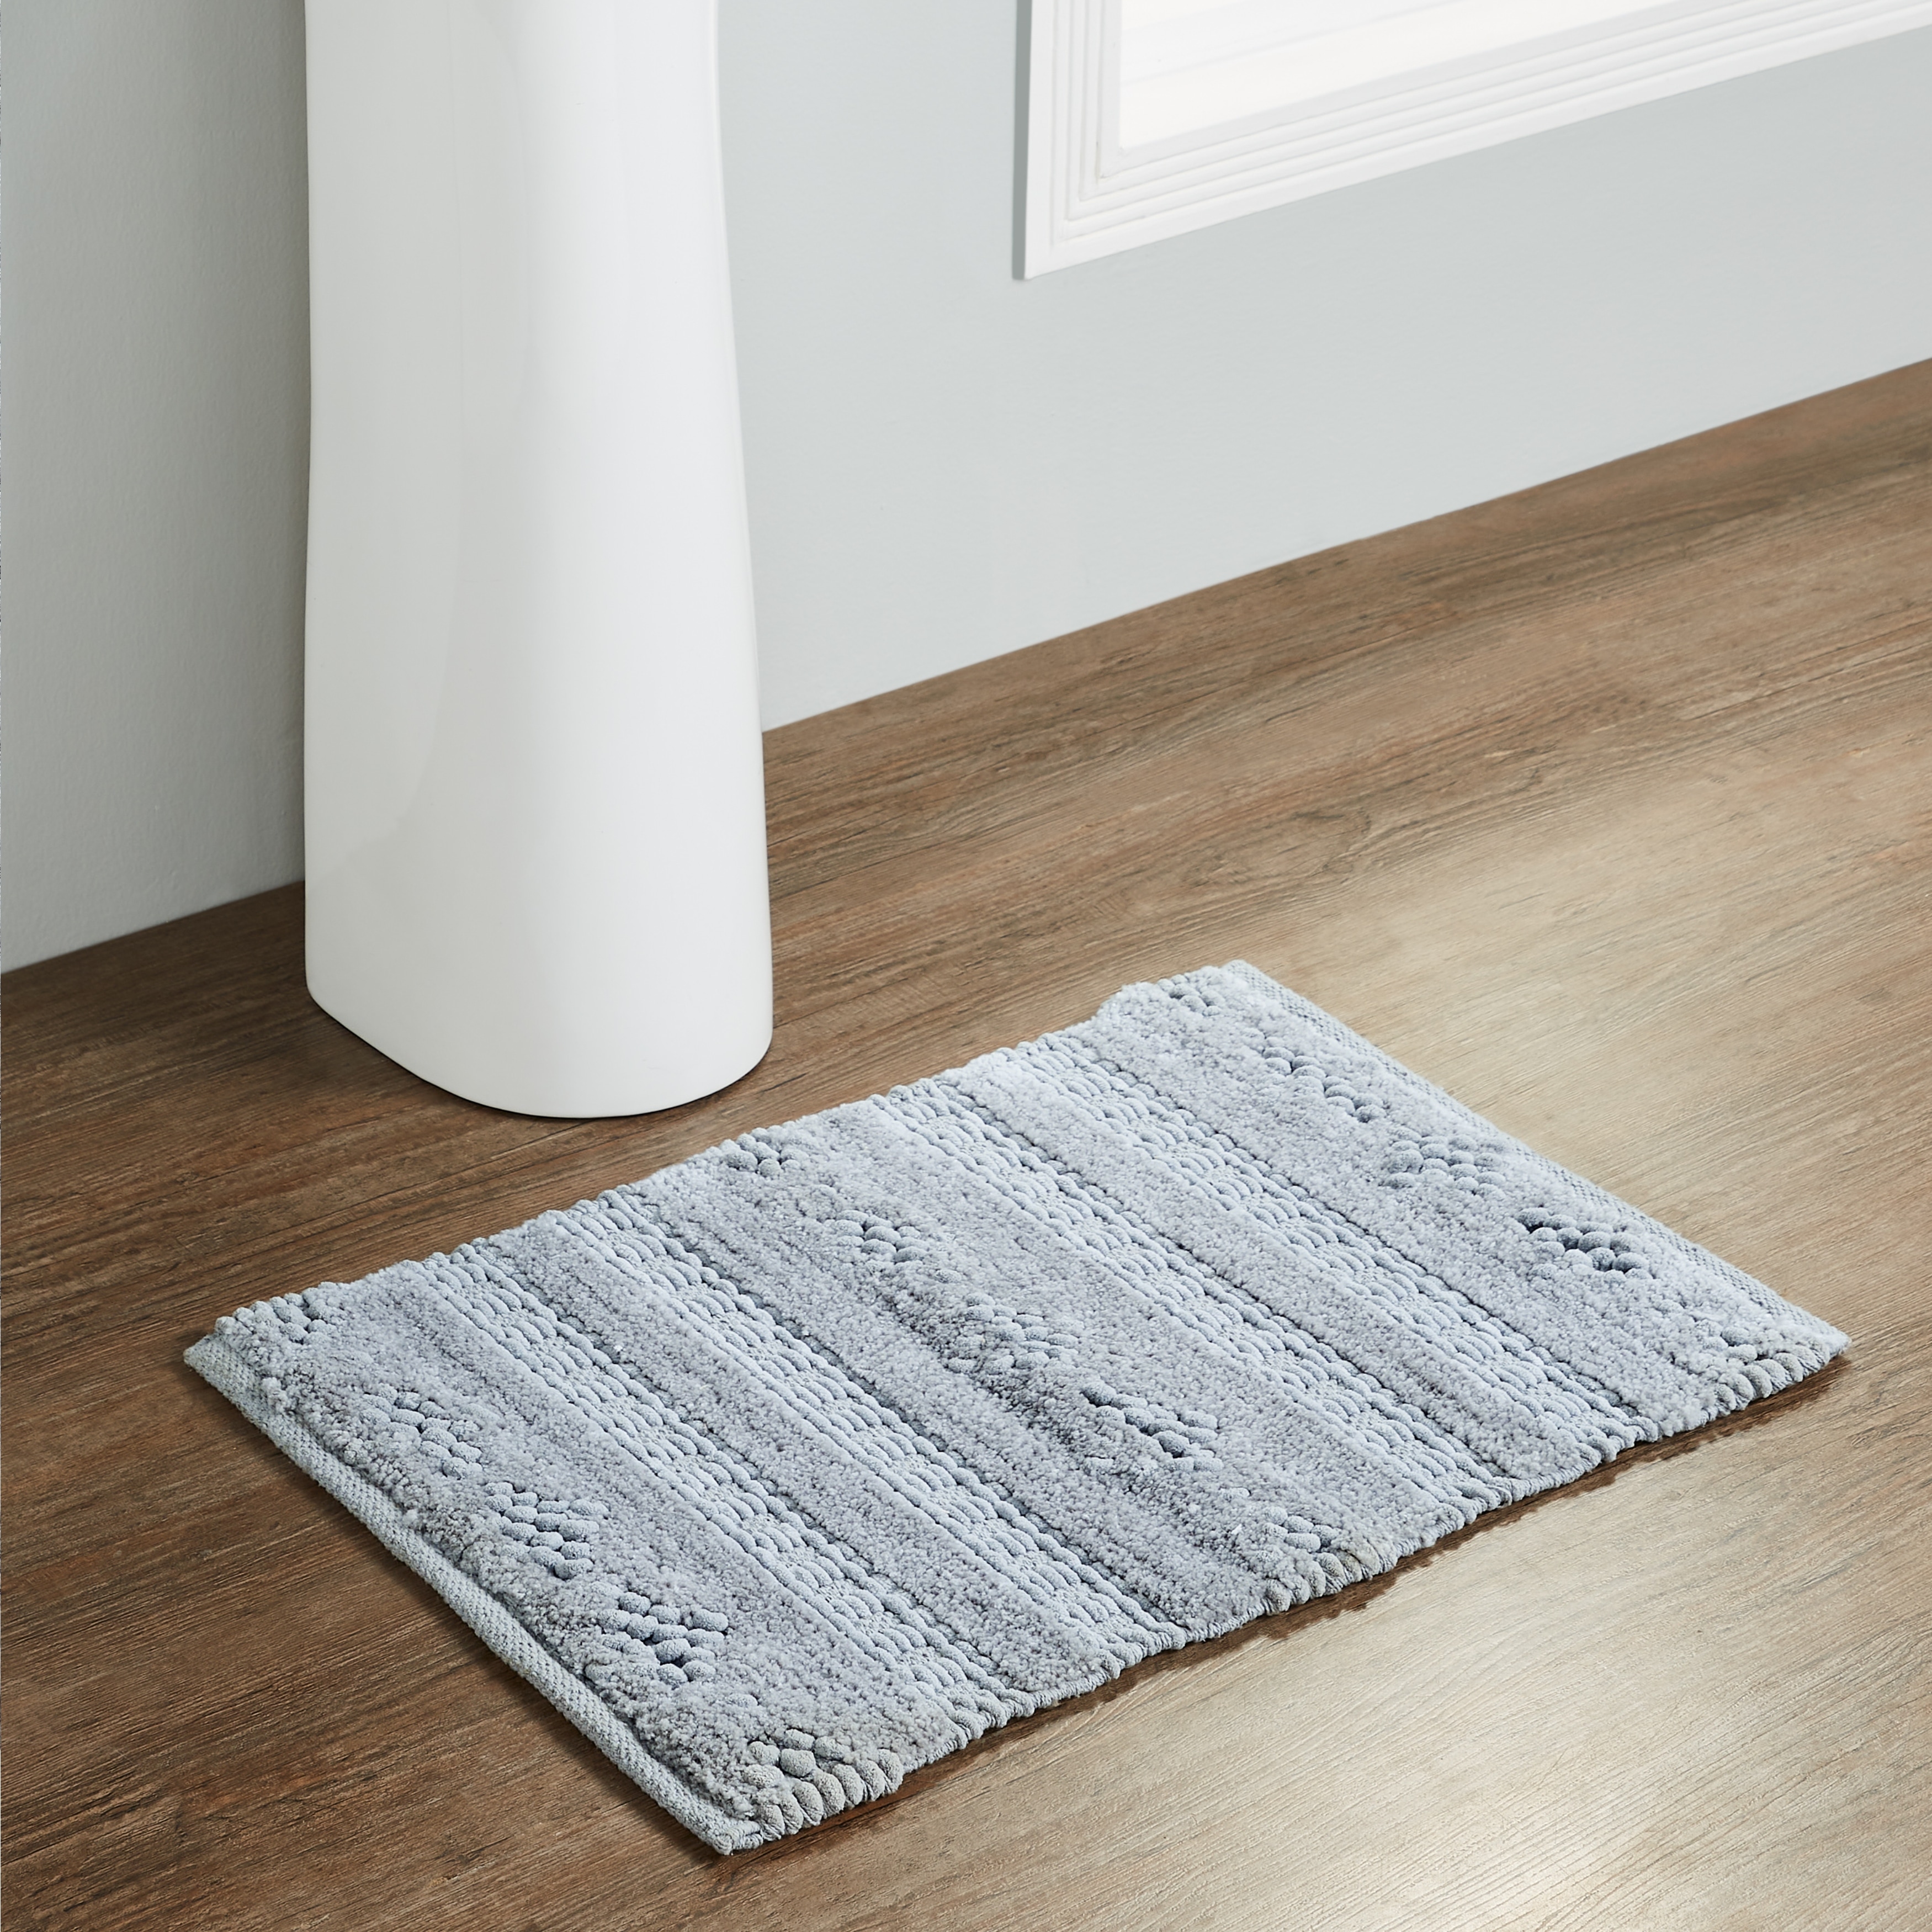 Bathroom Rugs Bath Mats Sets Super Absorbent Chenille Striped Bath Mats Non  Skid Machine Wash Dry Rugs for Bathroom Floor - China Mat and Carpet price